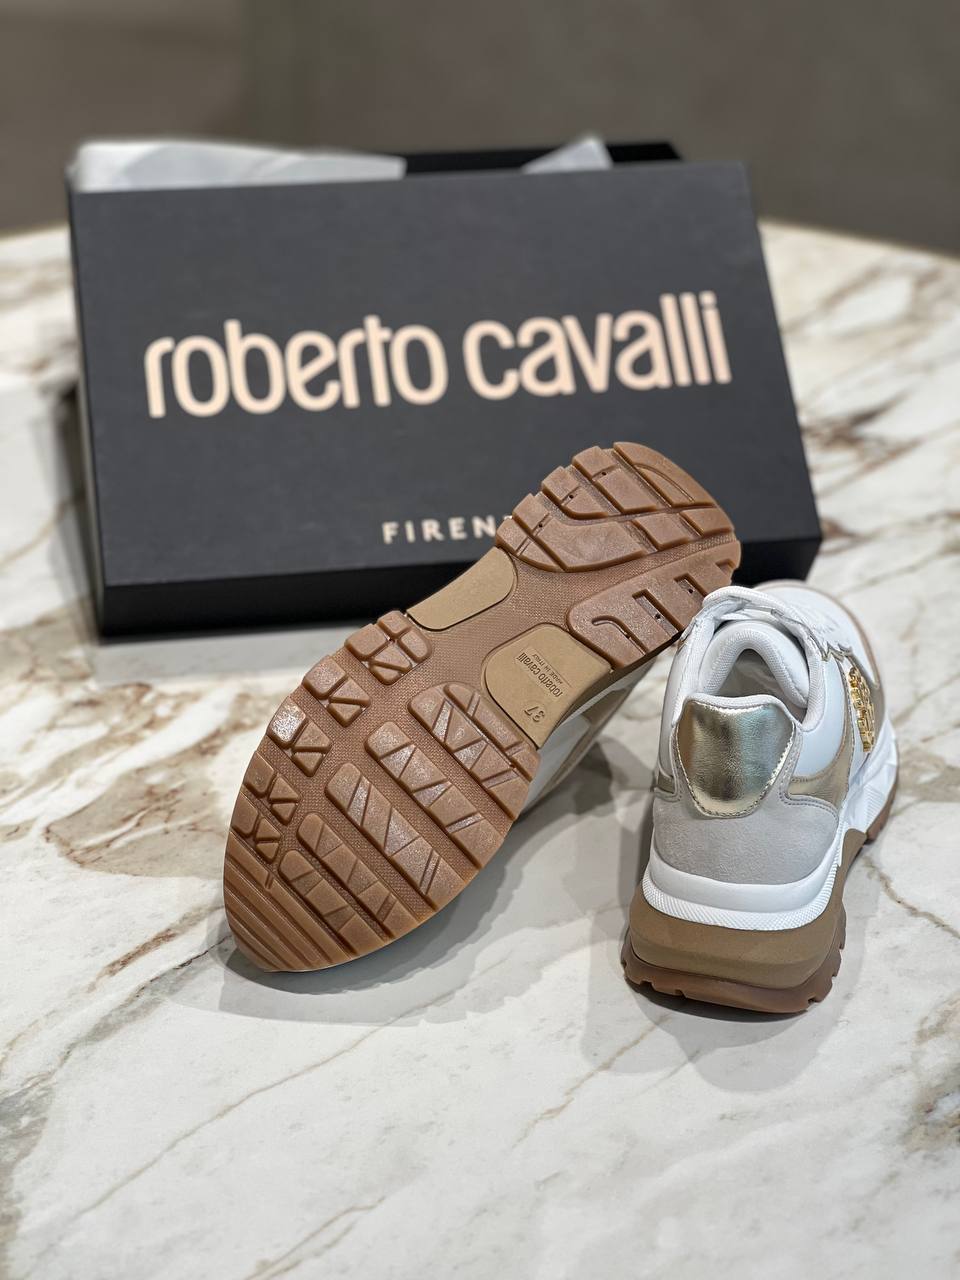 Roberto Cavalli Outlets 4707